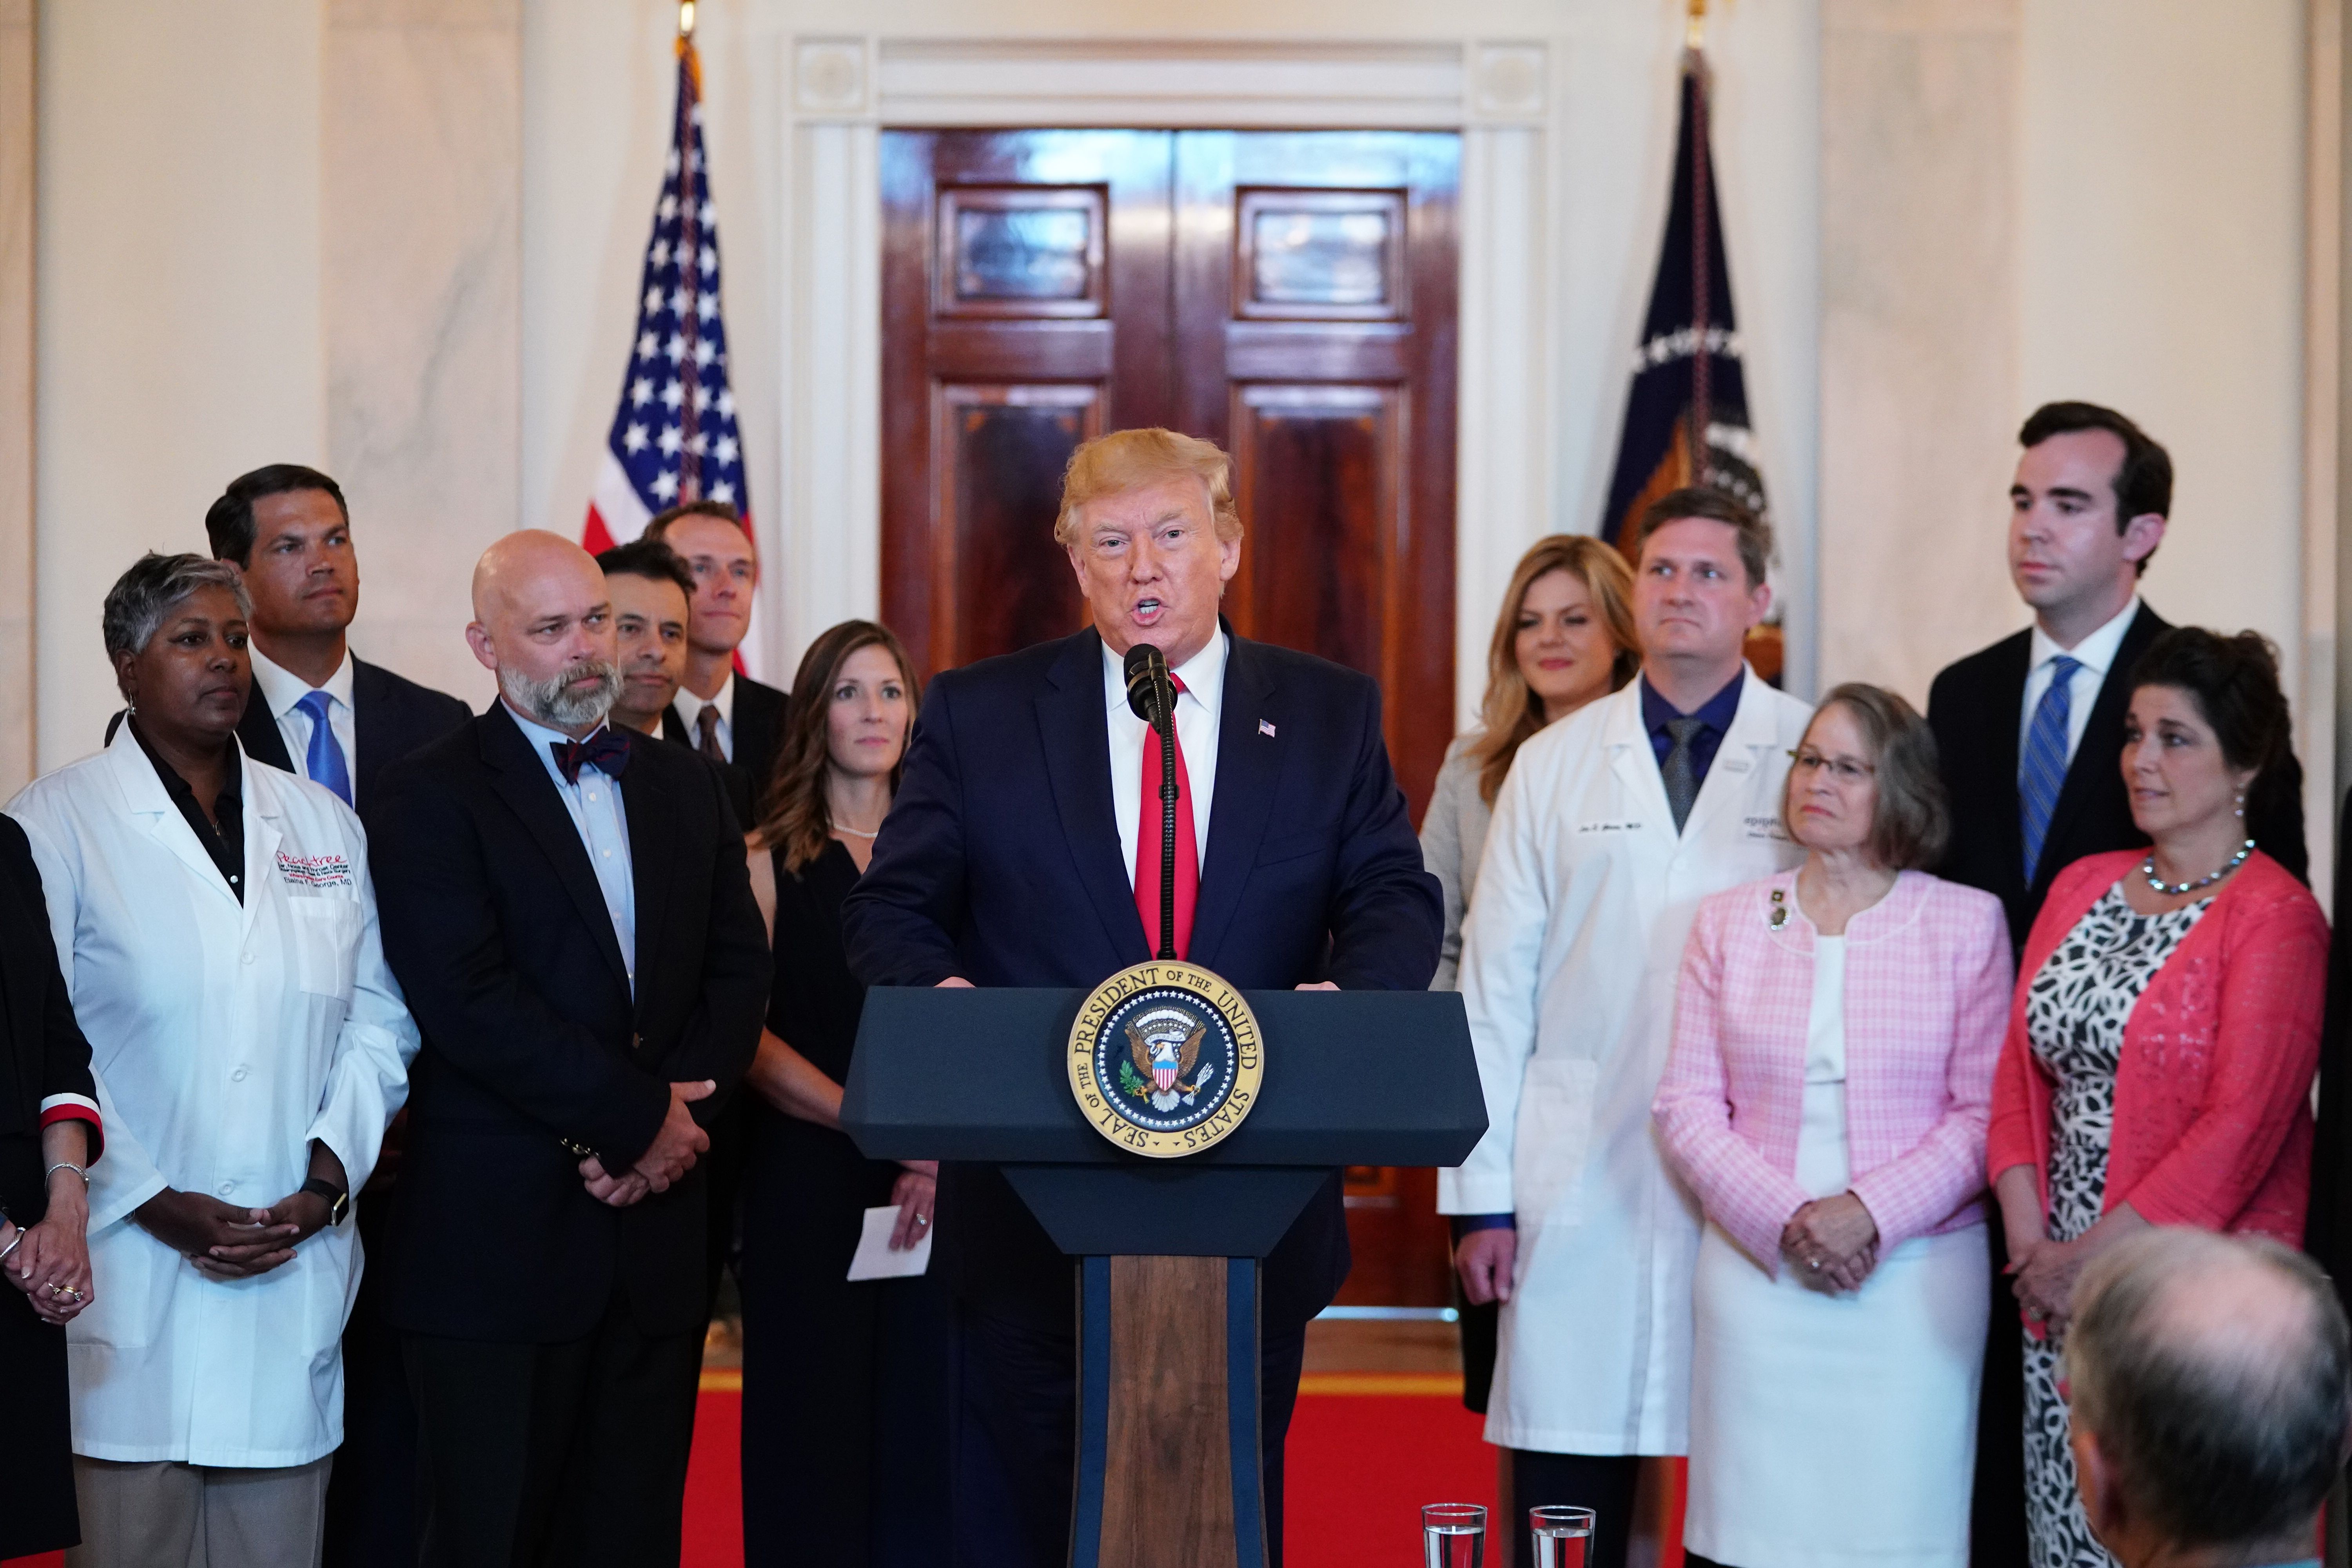 US President Donald Trump speaks before signing an executive order on "improving price and quality transparency in healthcare" in the Grand Foyer of the White House on June 24, 2019. (MANDEL NGAN/AFP/Getty Images)